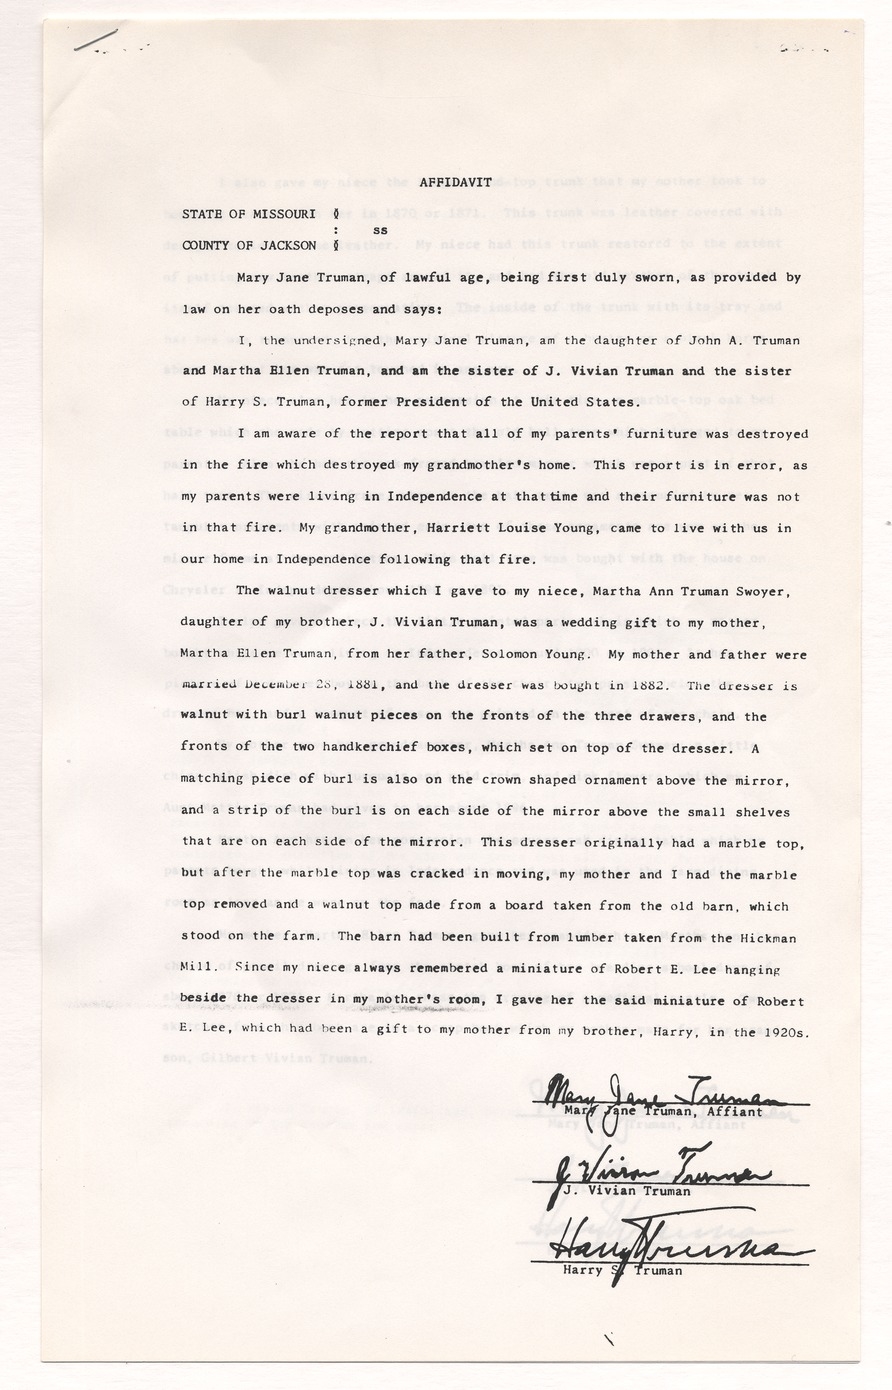 Letter from Mary Jane Truman to Martha Ann Swoyer and Affidavit by Mary Jane Truman Witnessed by J. Vivian Truman and Former President Harry S. Truman